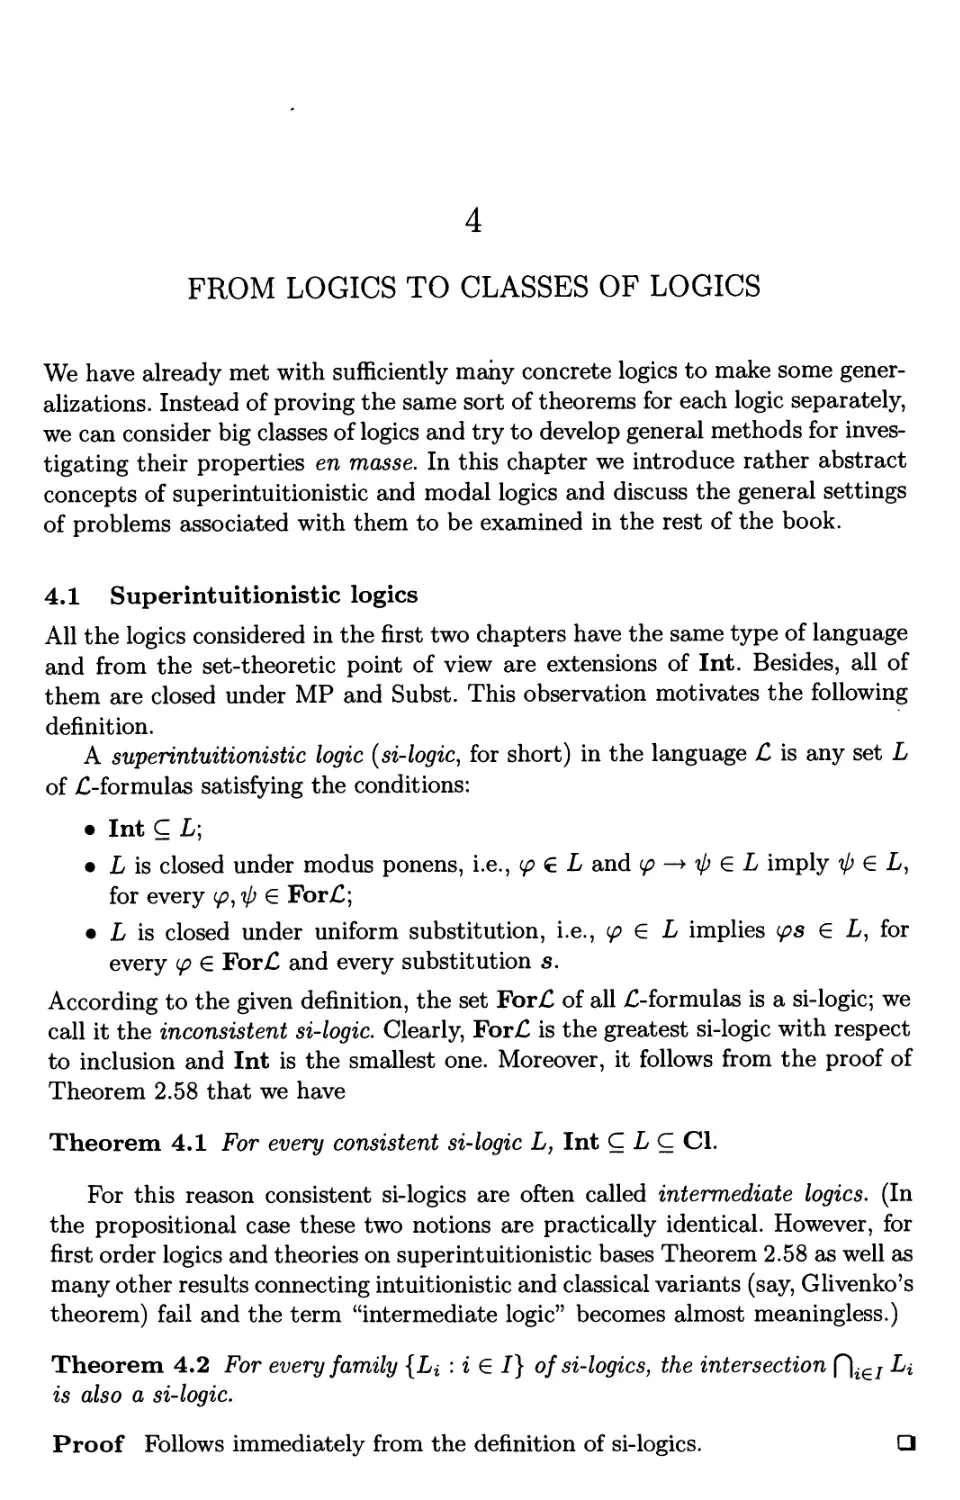 4 From logics to classes of logics